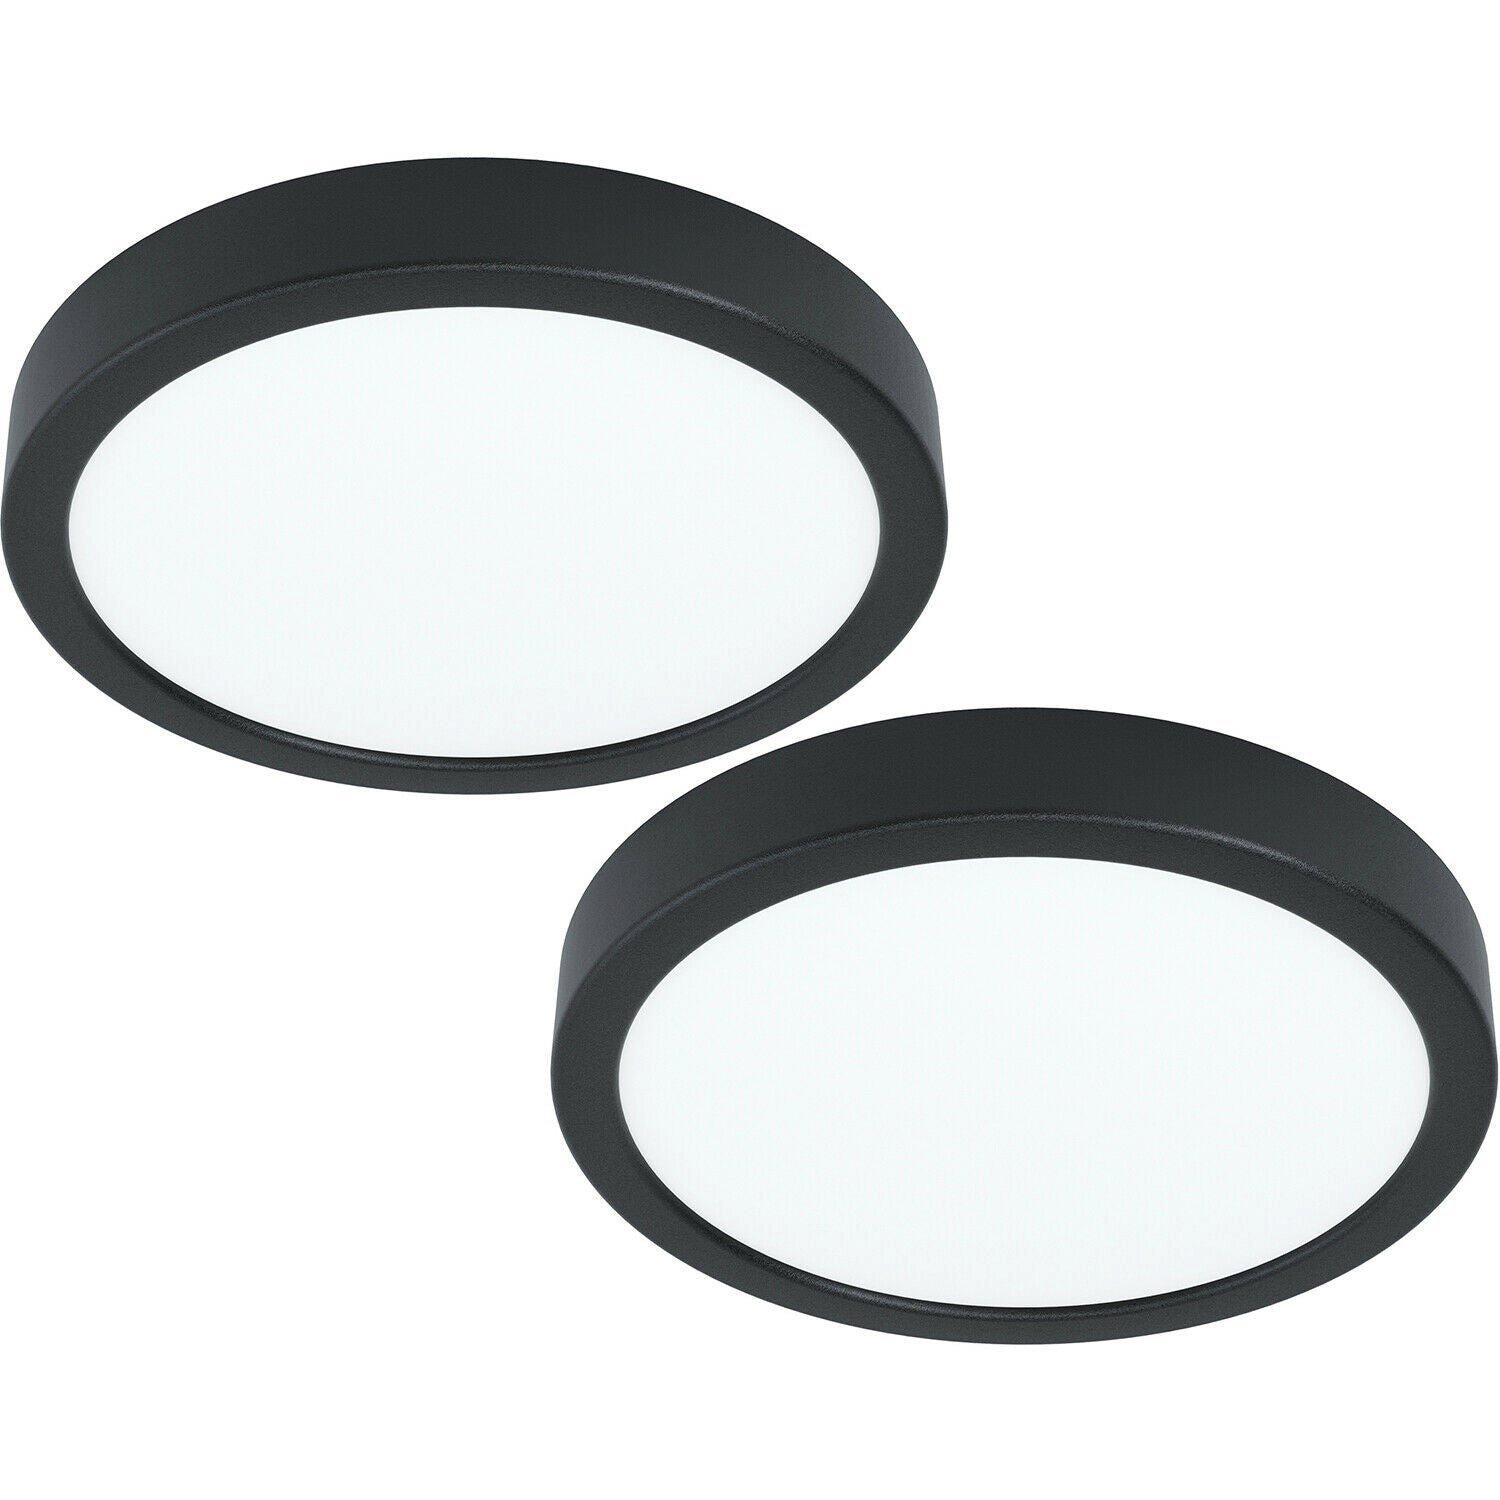 2 PACK Wall / Ceiling Light Black 210mm Round Surface Mounted 16.5W LED 4000K